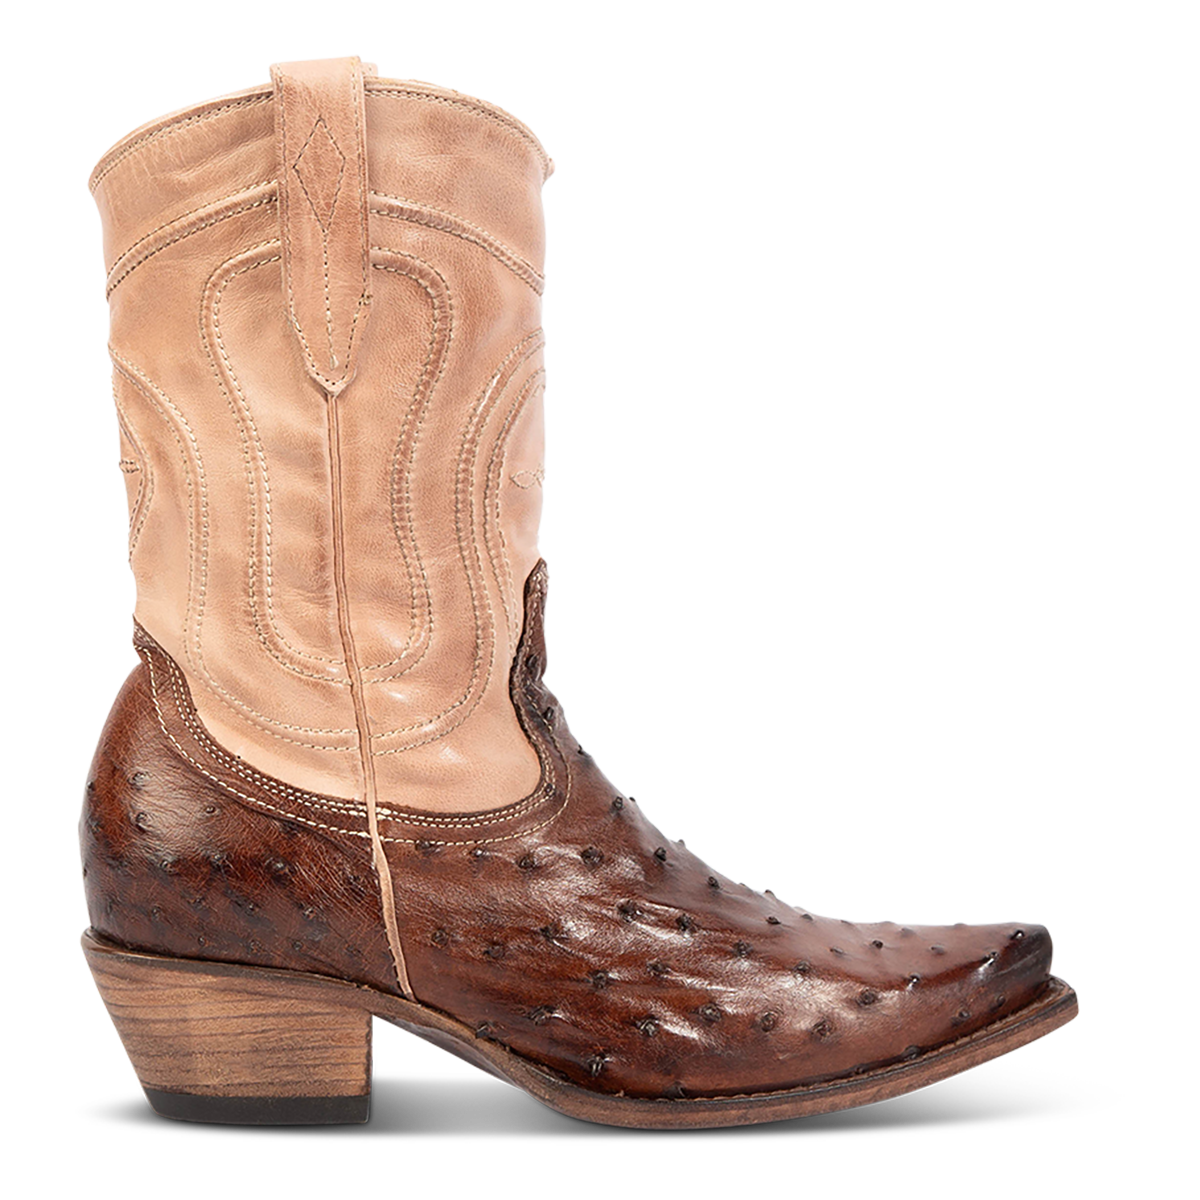 FREEBIRD women's Warrick brown ostrich multi exotic leather western cowgirl mid calf boot